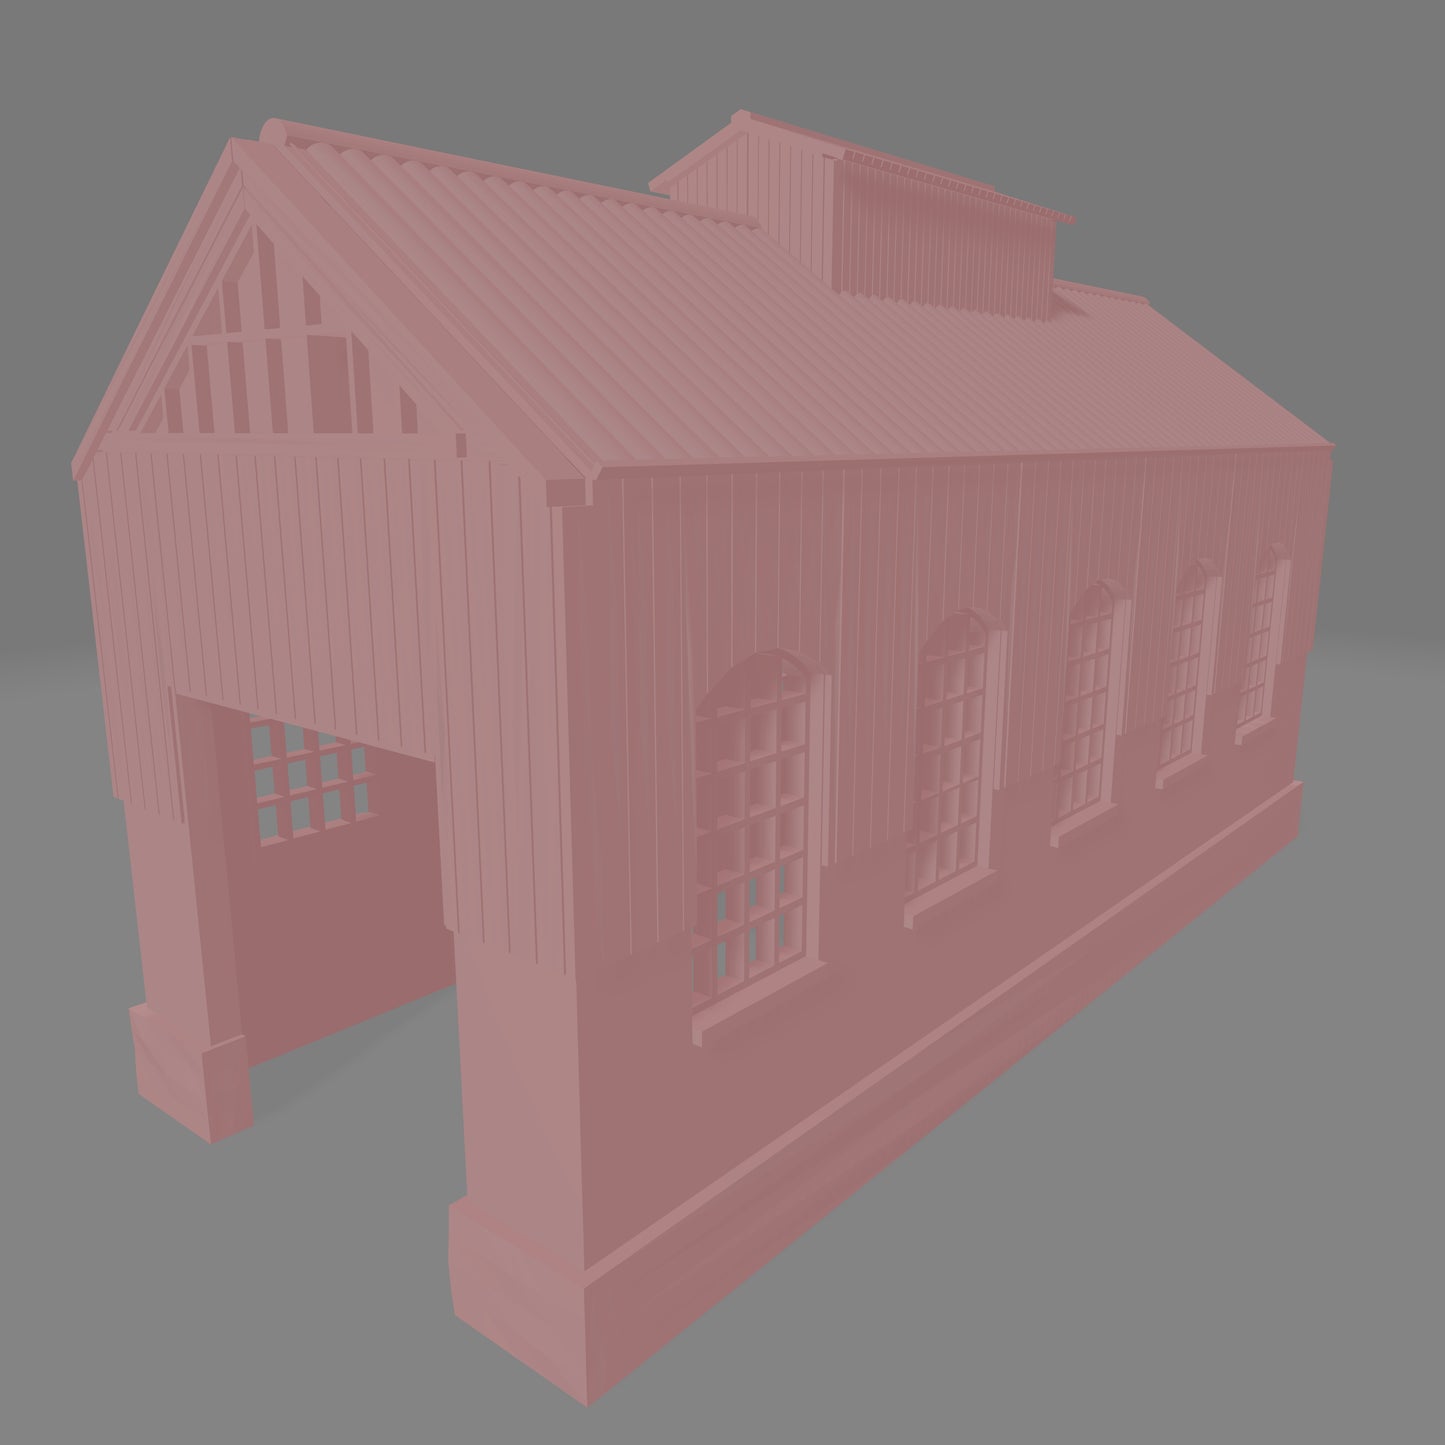 Engine Shed - Commissioned